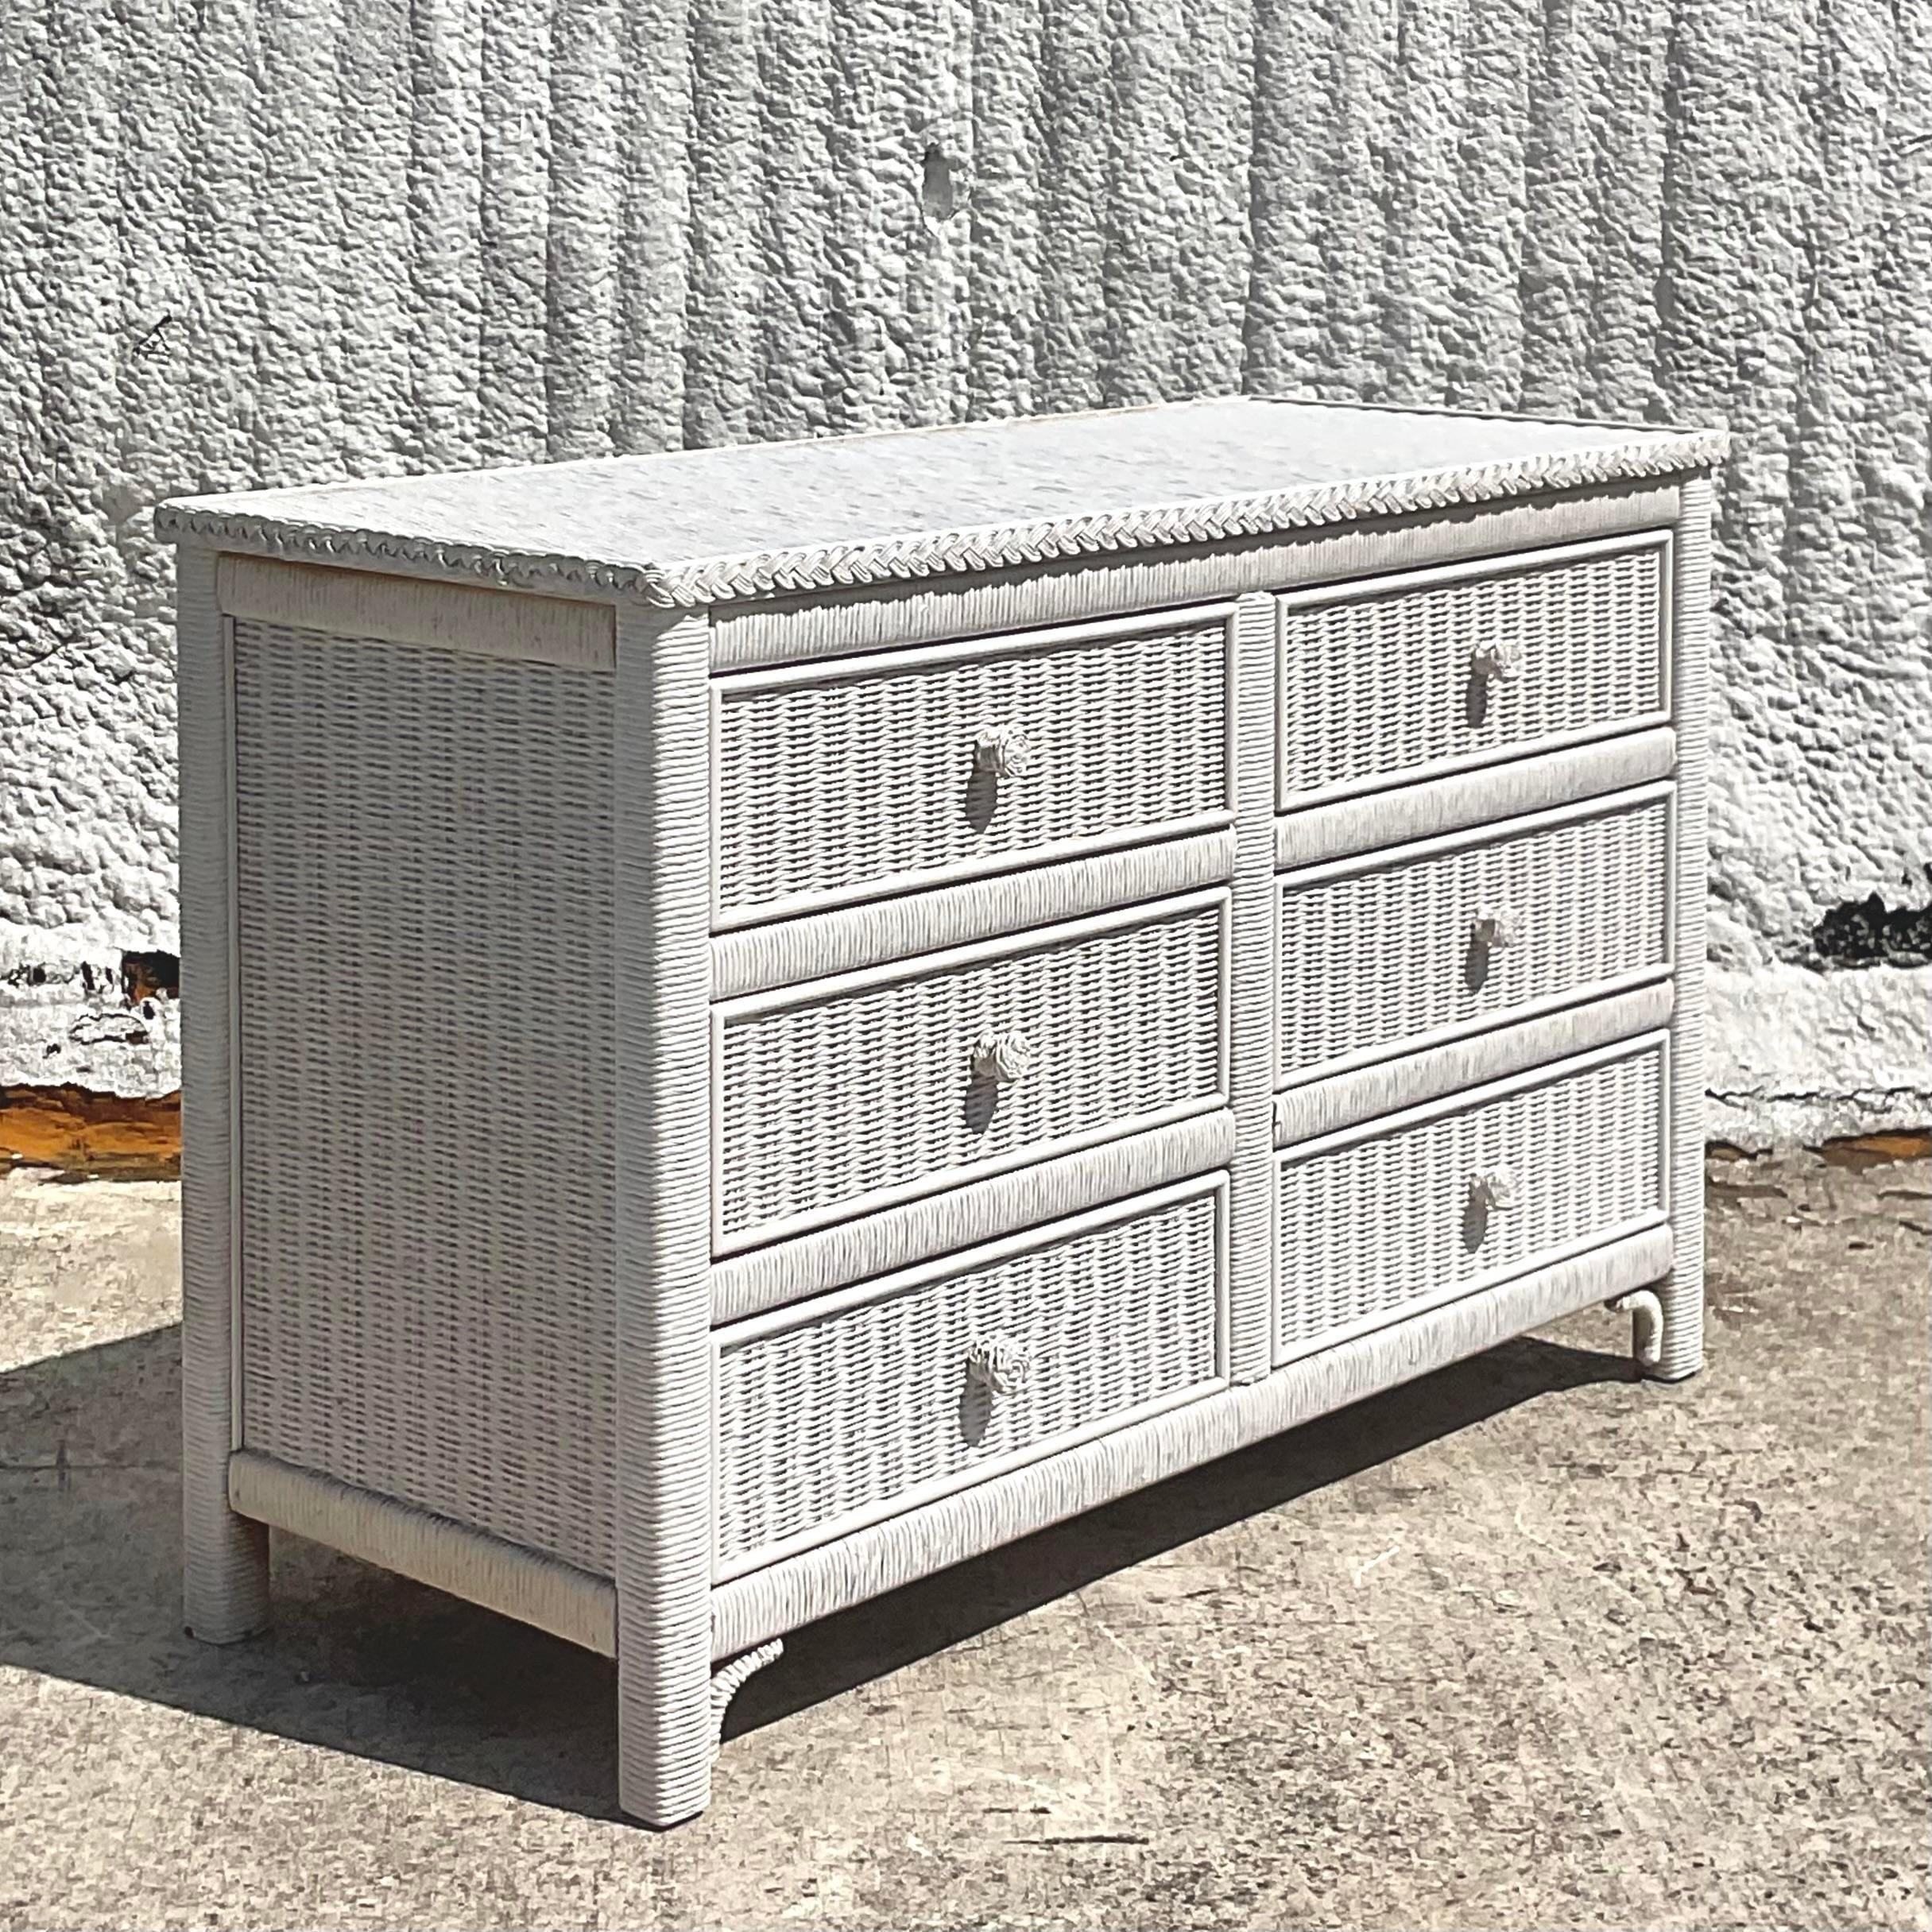 Dresser. Crafted with the finest wicker materials and timeless American craftsmanship, this dresser exudes coastal charm and practicality. Elevate your space with its classic design and create a serene retreat inspired by the beauty of the seaside.